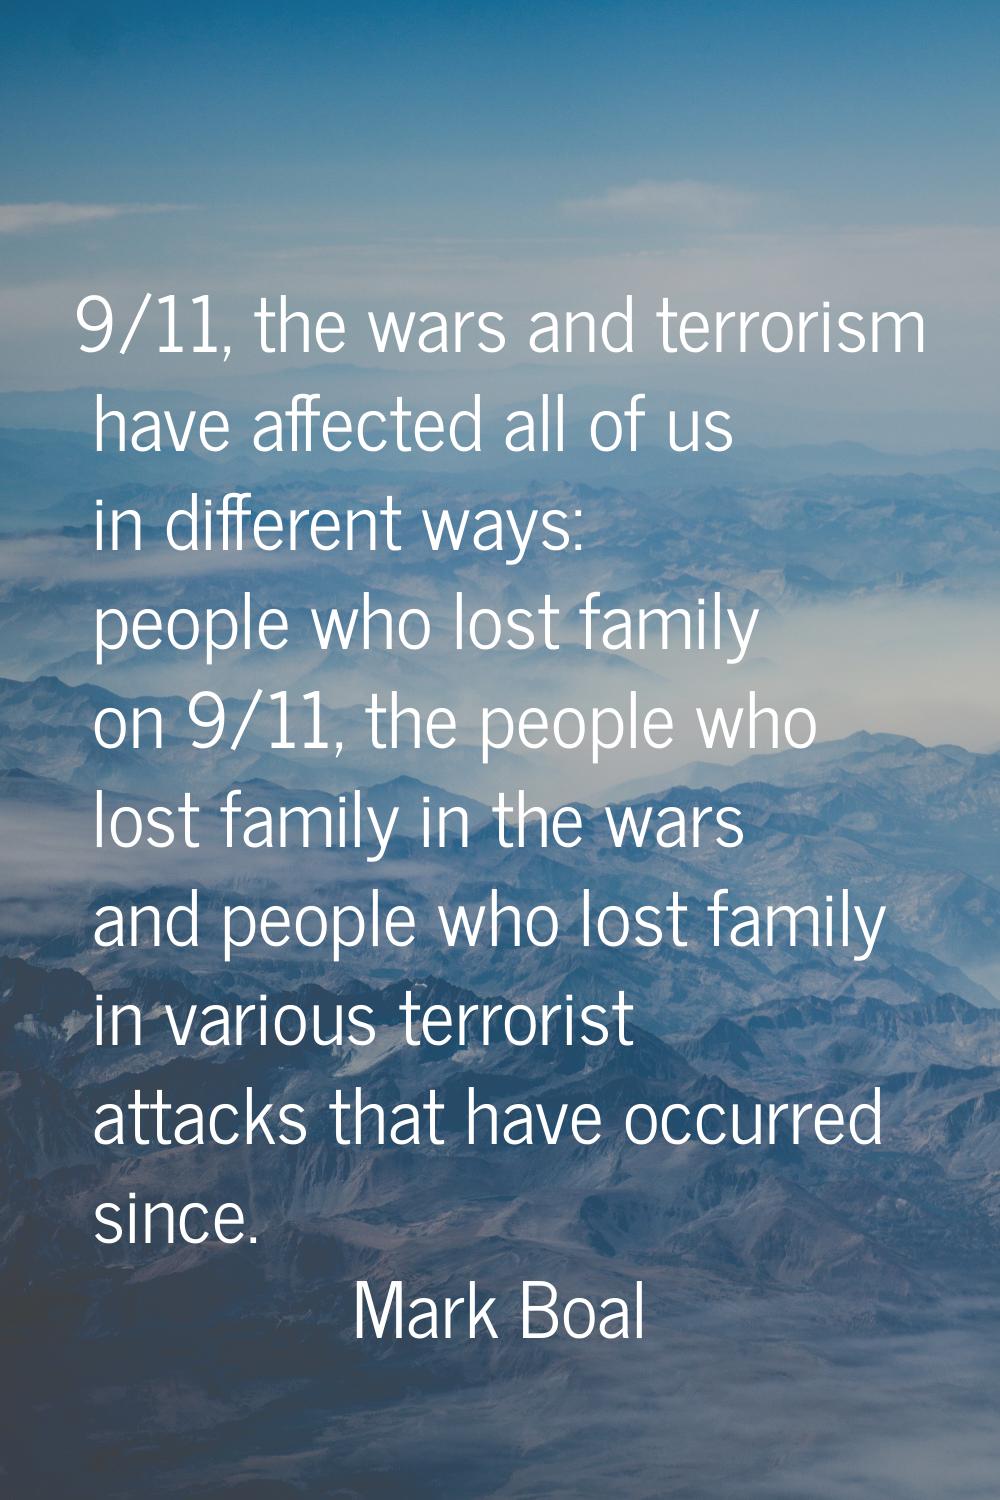 9/11, the wars and terrorism have affected all of us in different ways: people who lost family on 9